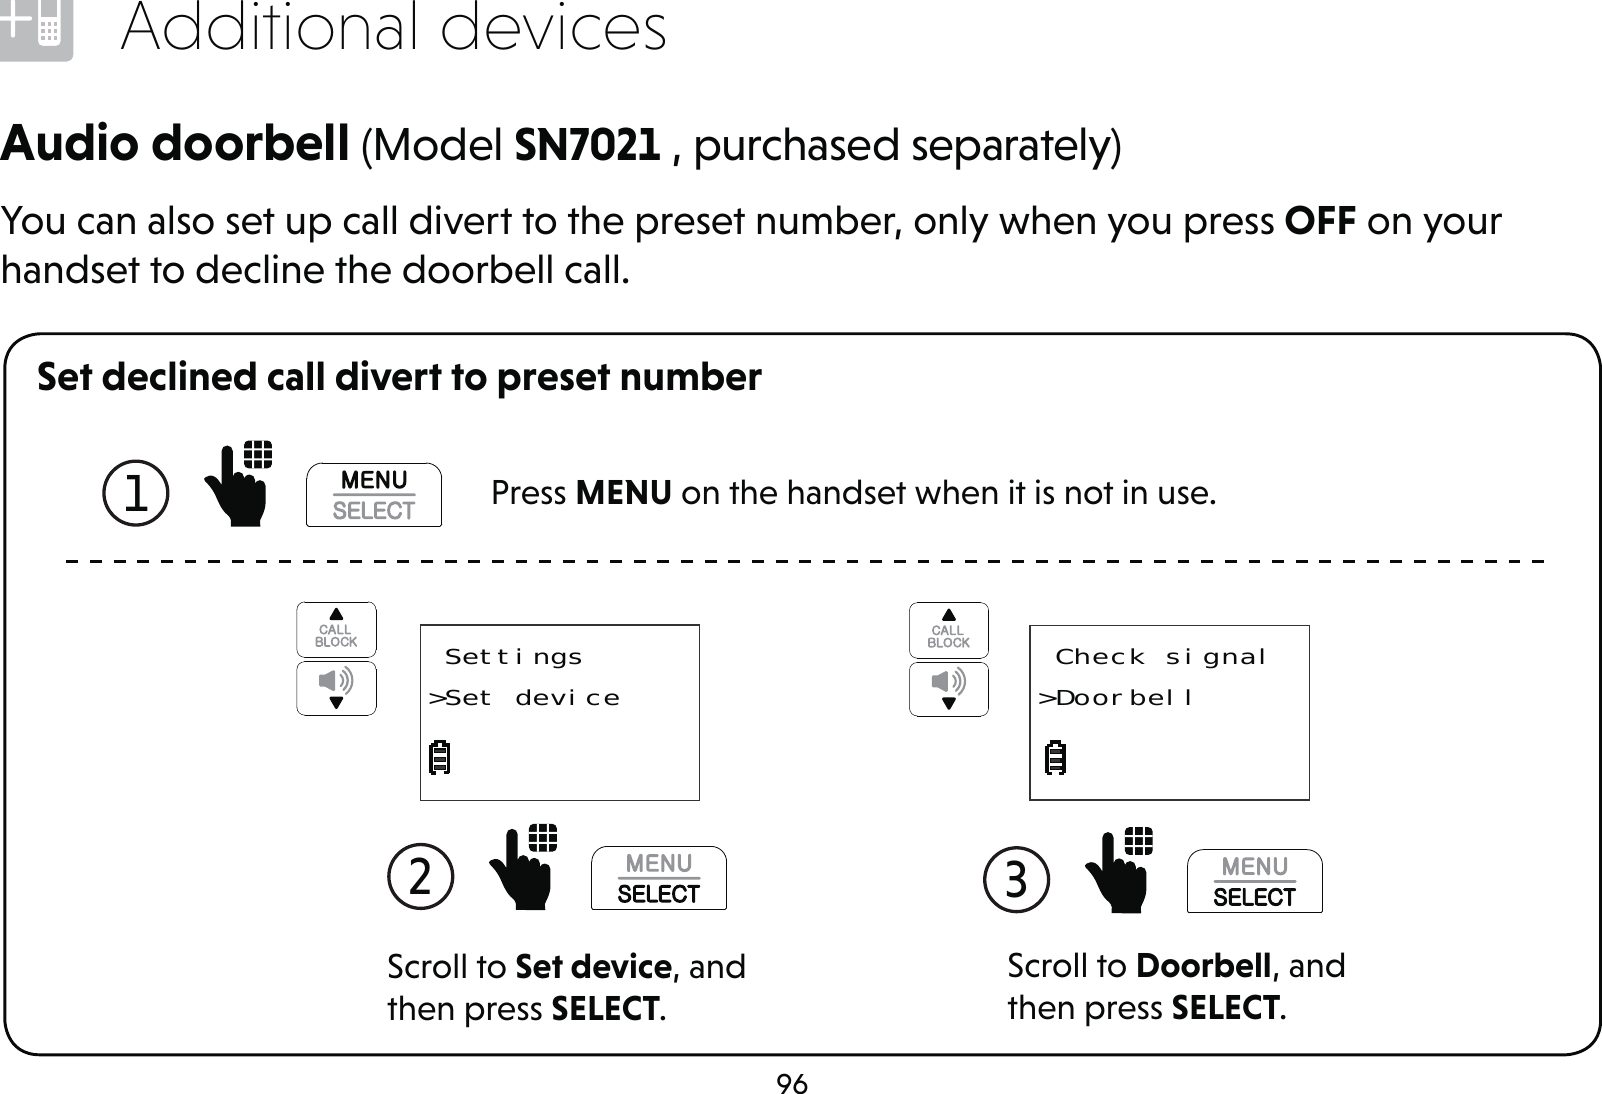 96Additional devicesSet declined call divert to preset numberYou can also set up call divert to the preset number, only when you press OFF on your handset to decline the doorbell call.Audio doorbell (Model SN7021 , purchased separately)Scroll to Doorbell, and then press SELECT.3   Check signal&gt;DoorbellScroll to Set device, and then press SELECT.2   Settings&gt;Set device1   Press MENU on the handset when it is not in use.